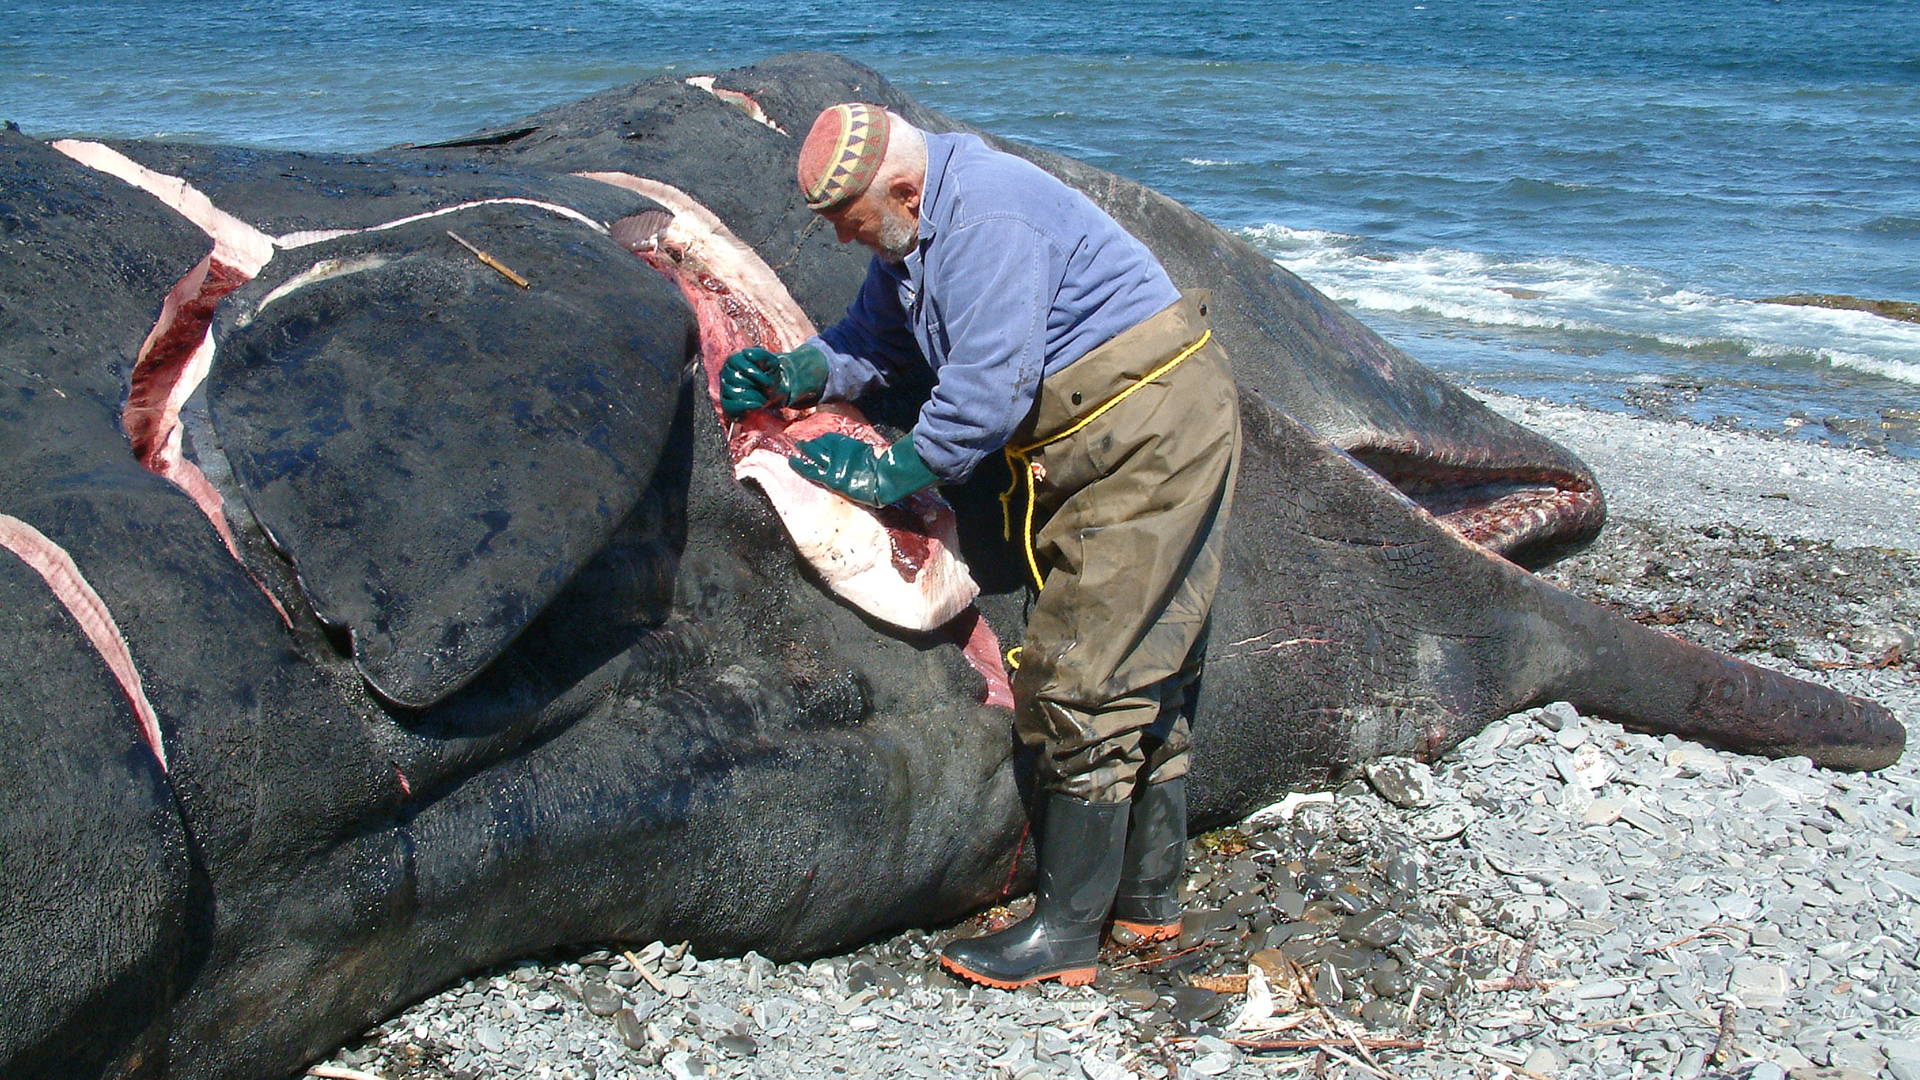 A man begins flensing the sperm whale carcass by removing a chunk of blubber.